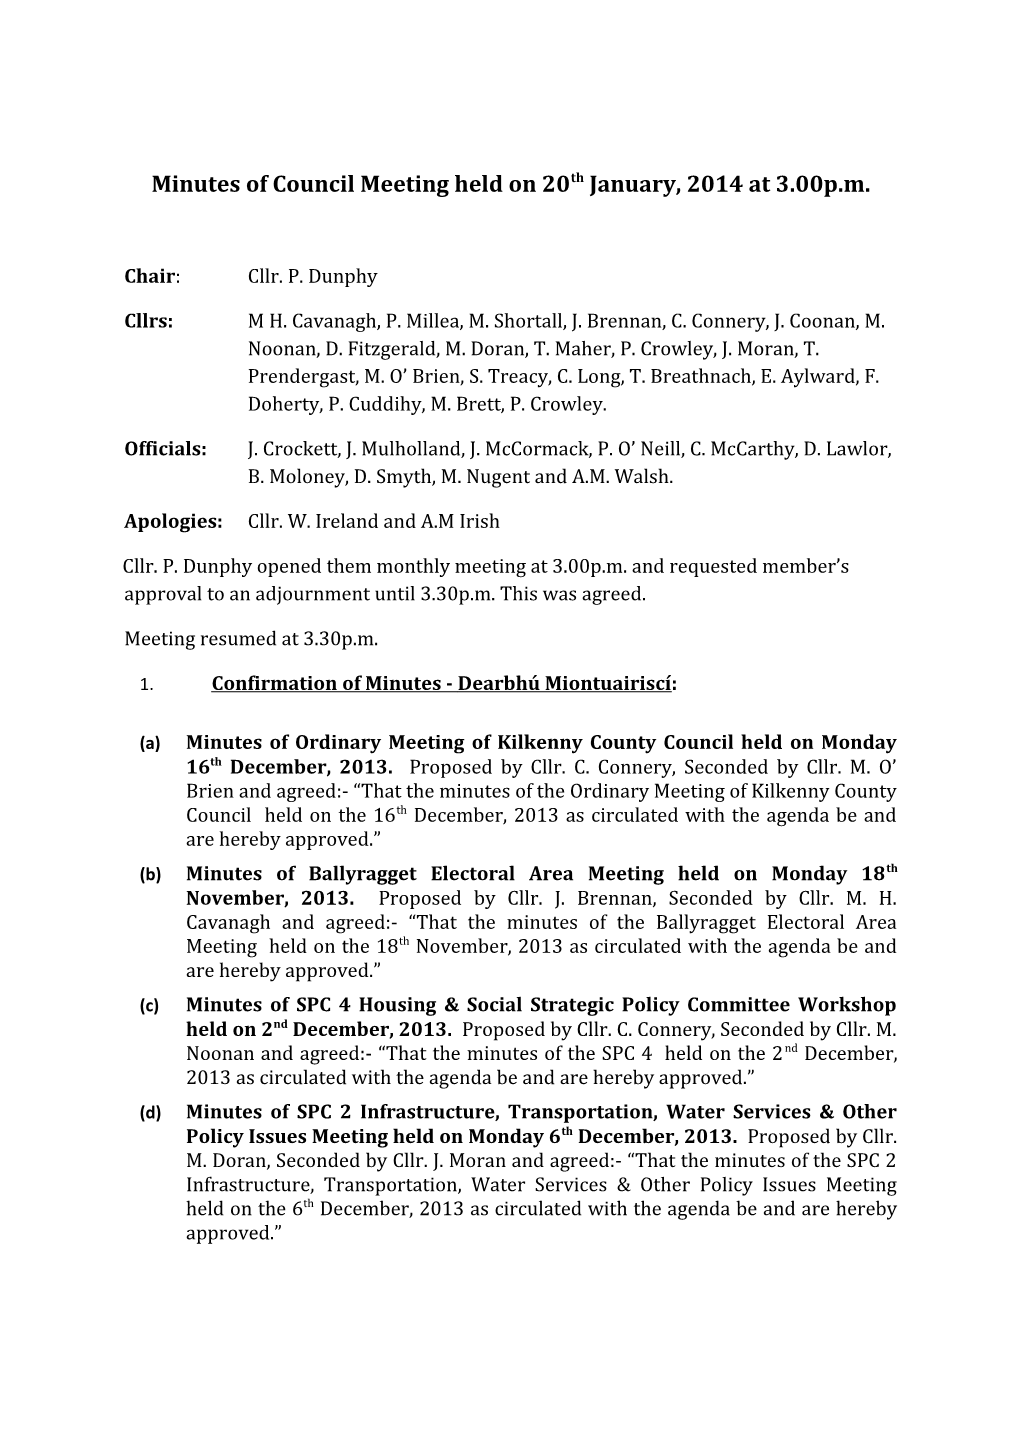 Minutes of Council Meeting Held on 20Th January, 2014 at 3.00P.M